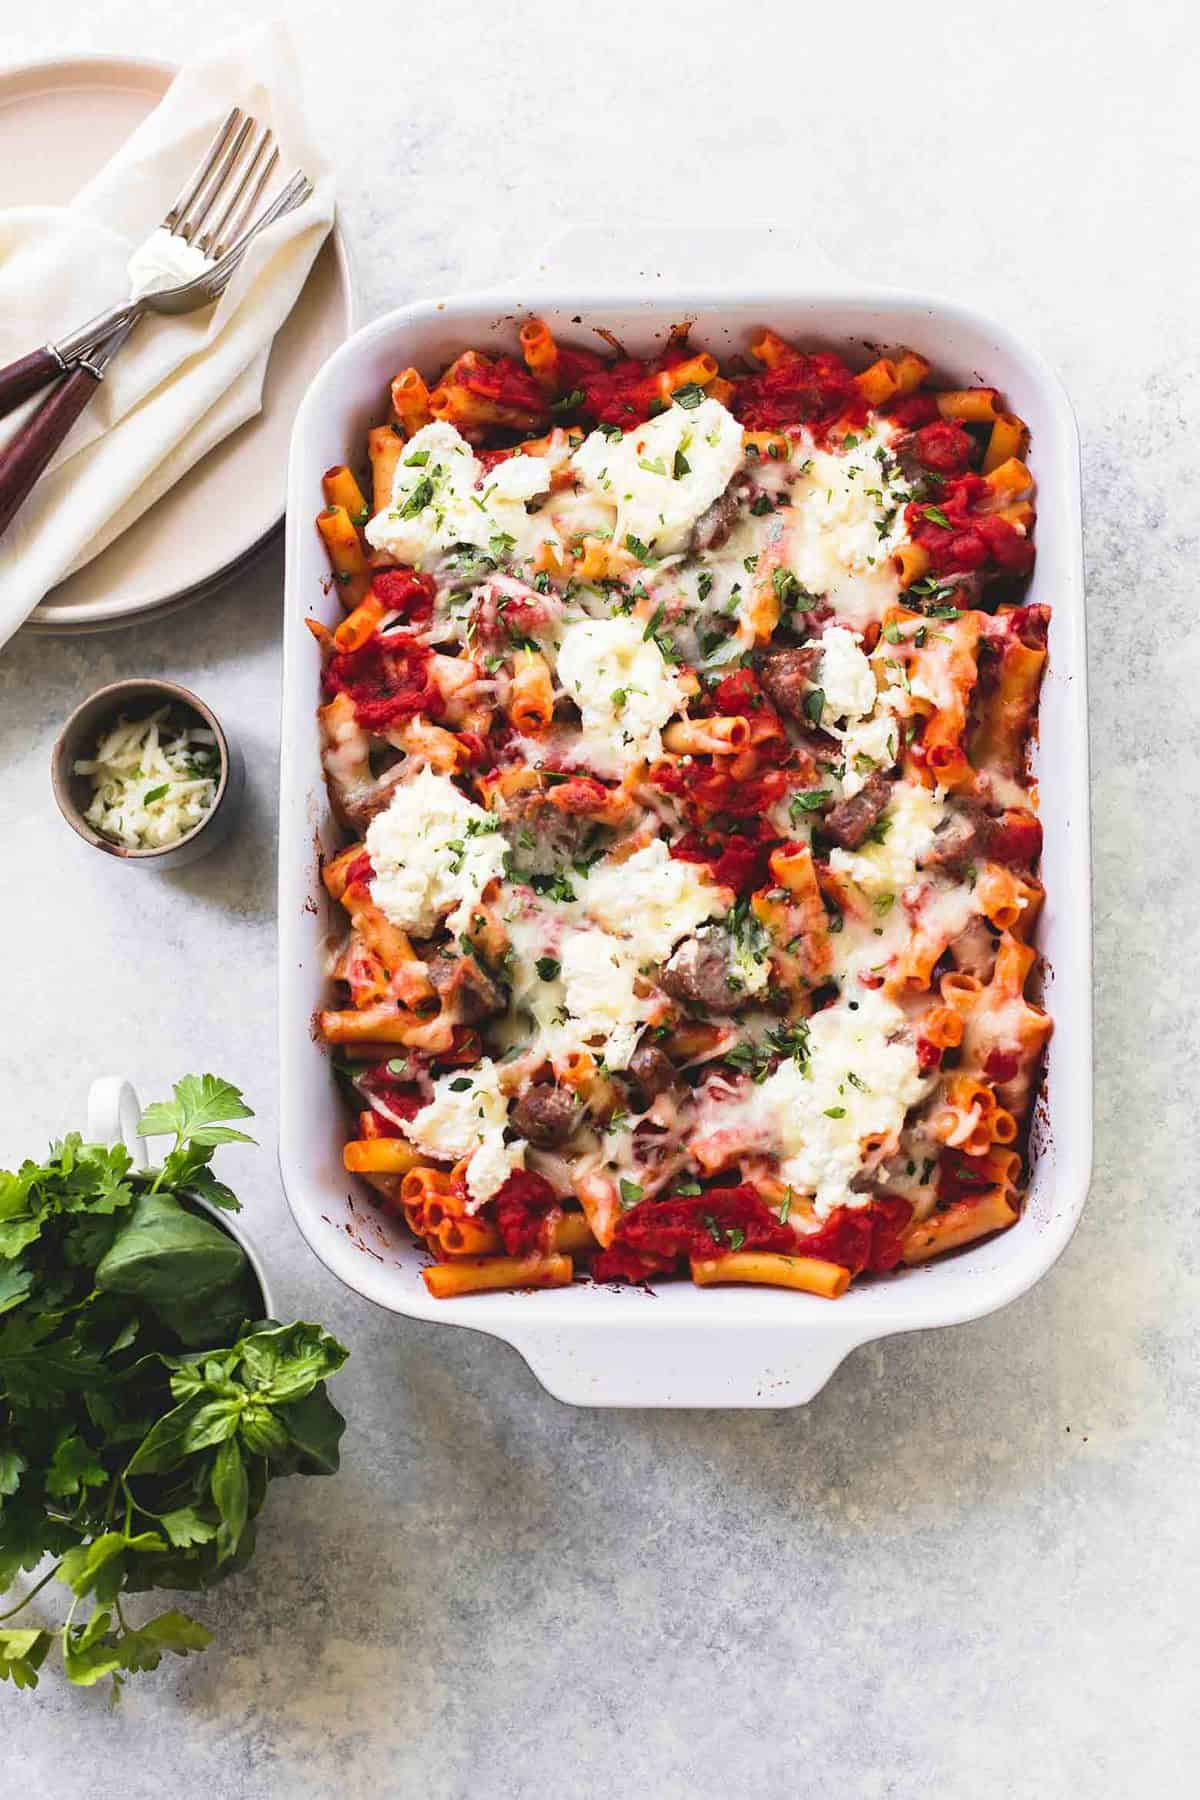 top view of baked ziti with ricotta and sausage in a baking pan with a plate with a cloth napkin and forks on top, a small bowl of mozzarella cheese, and parsley leaves on the side.